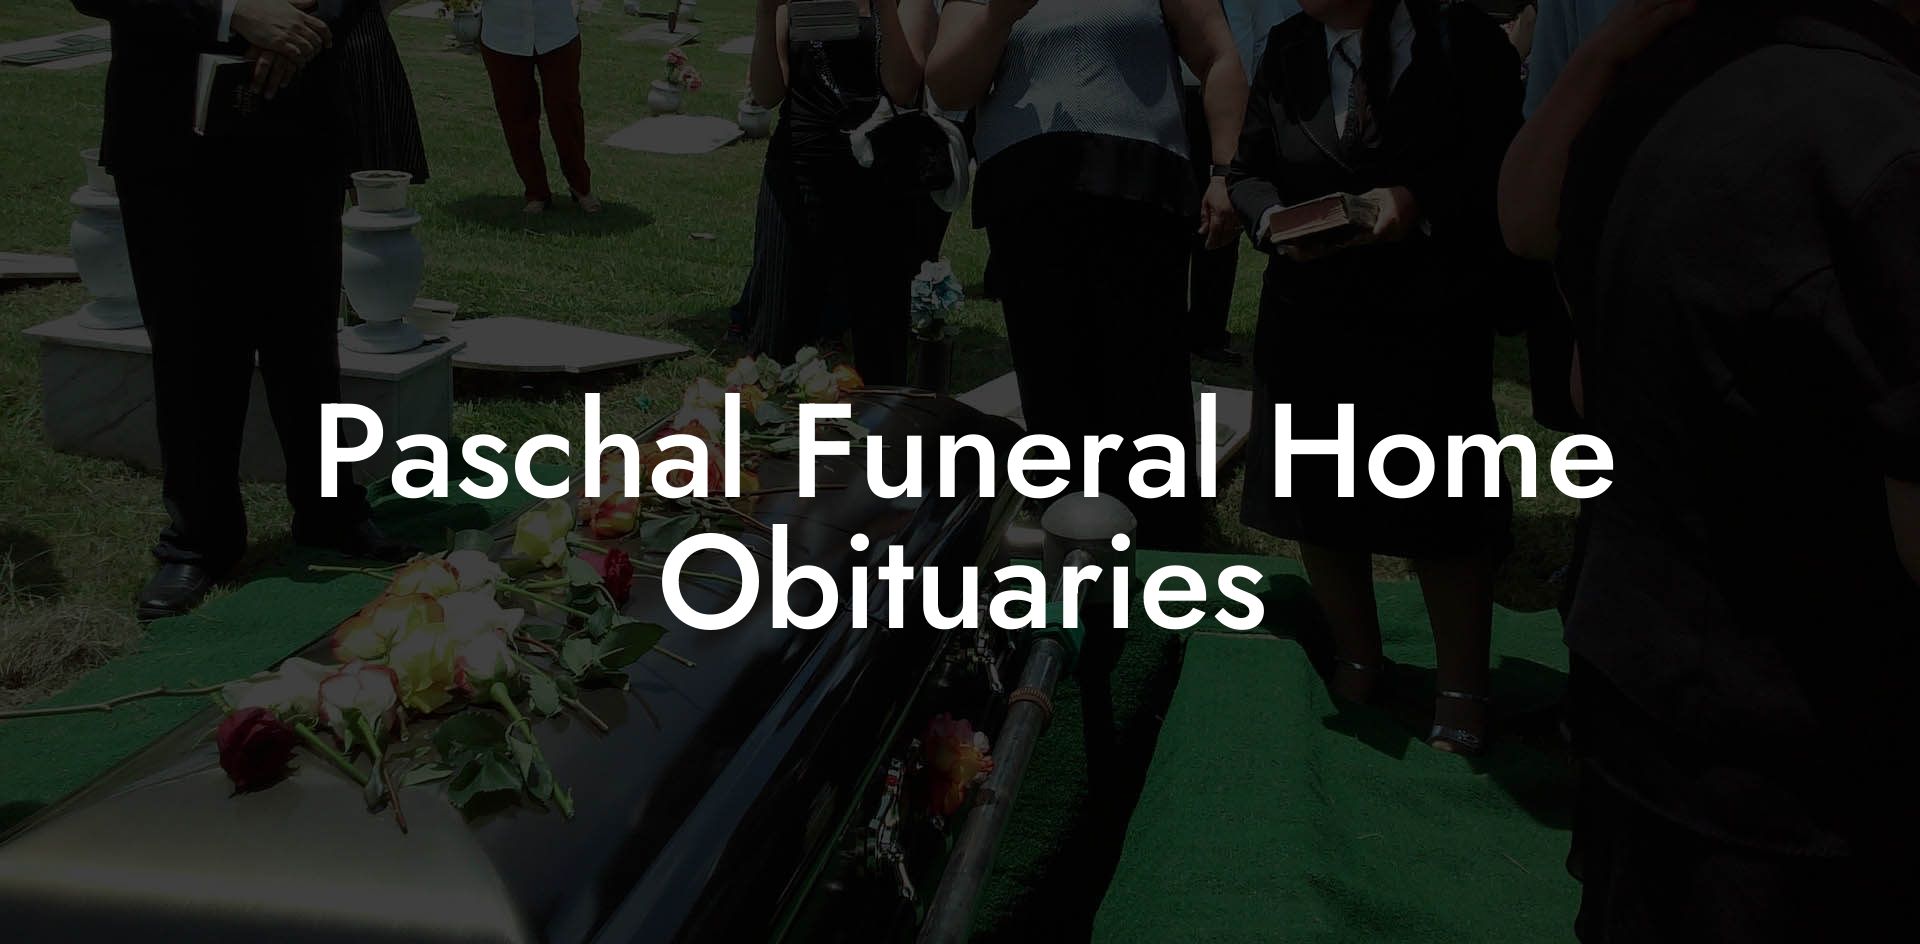 Paschal Funeral Home Obituaries